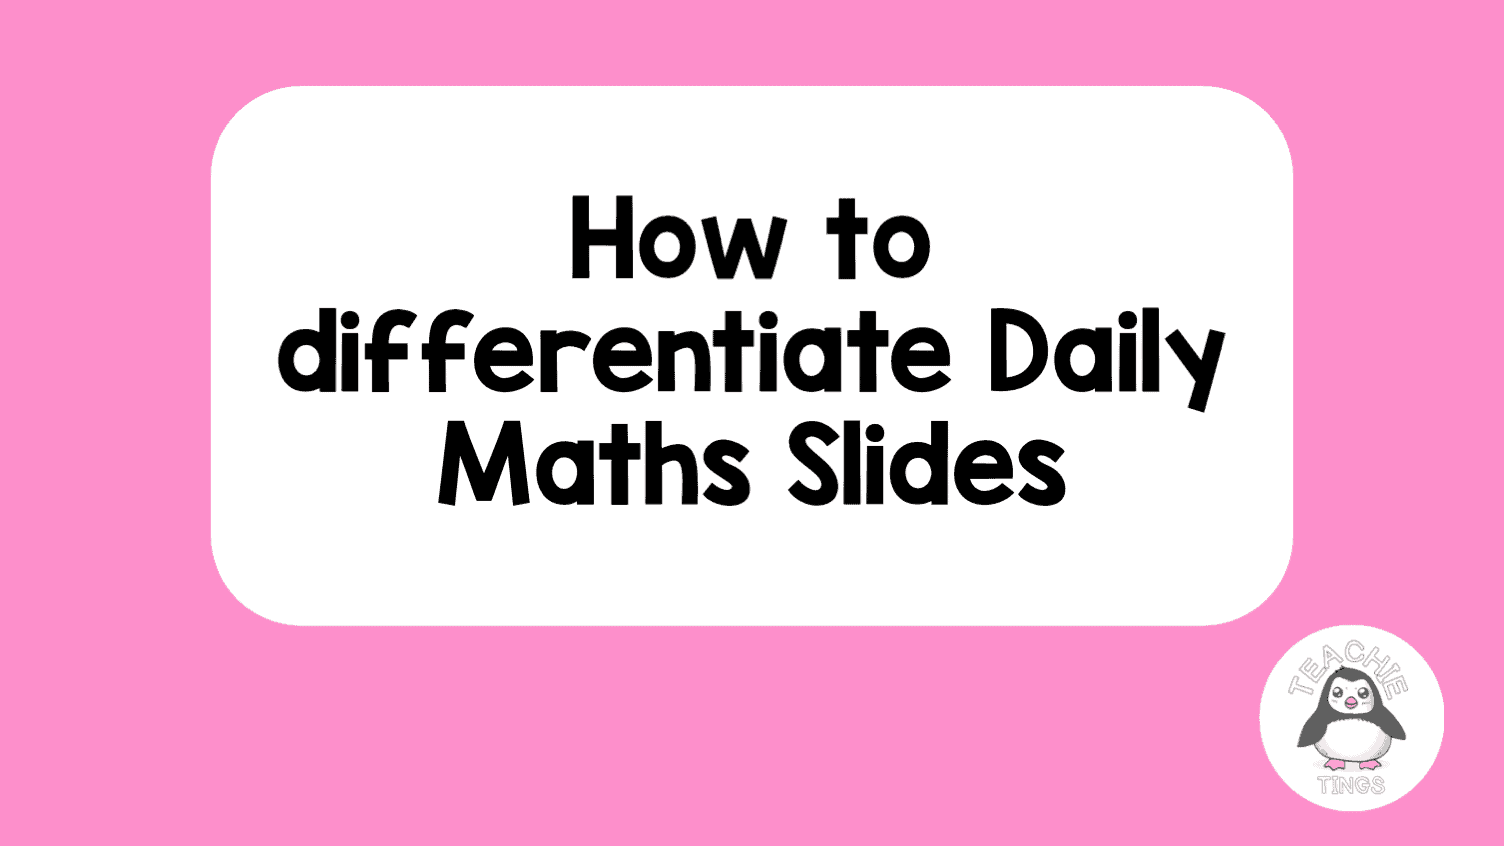 How to differentiate daily maths slides